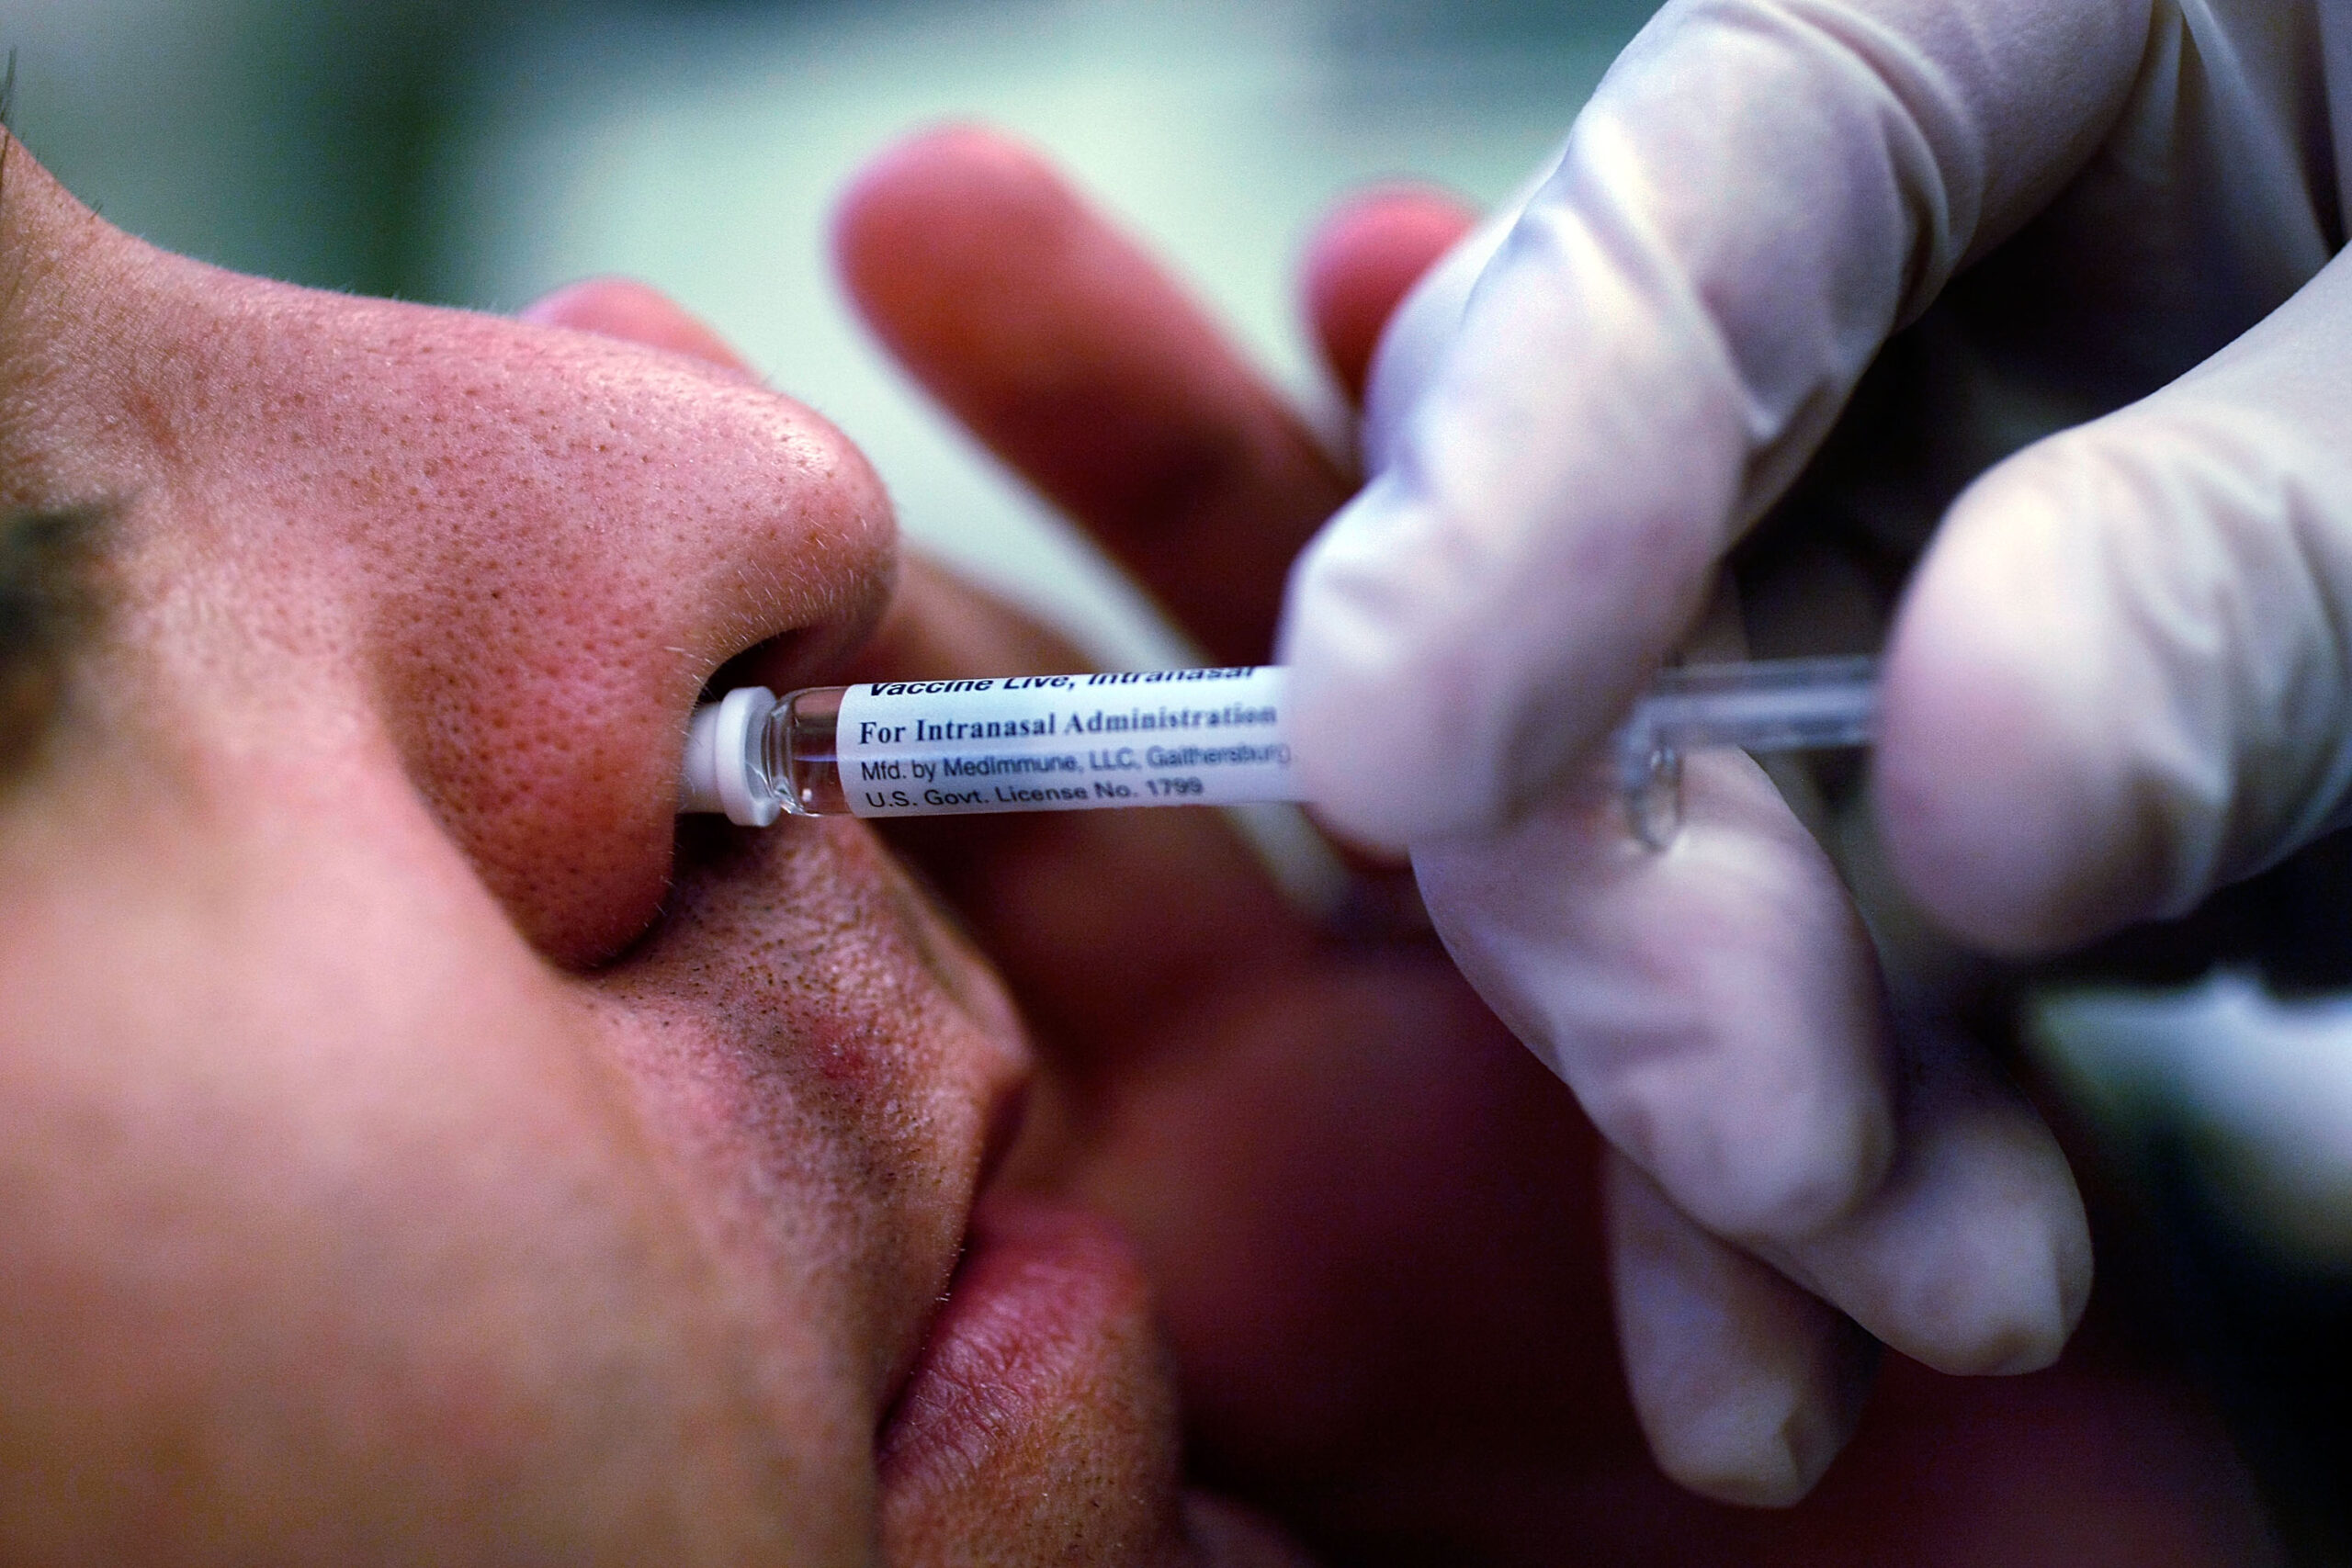 The H1N1 nasal vaccine pictured here, has been available for over a decade. 